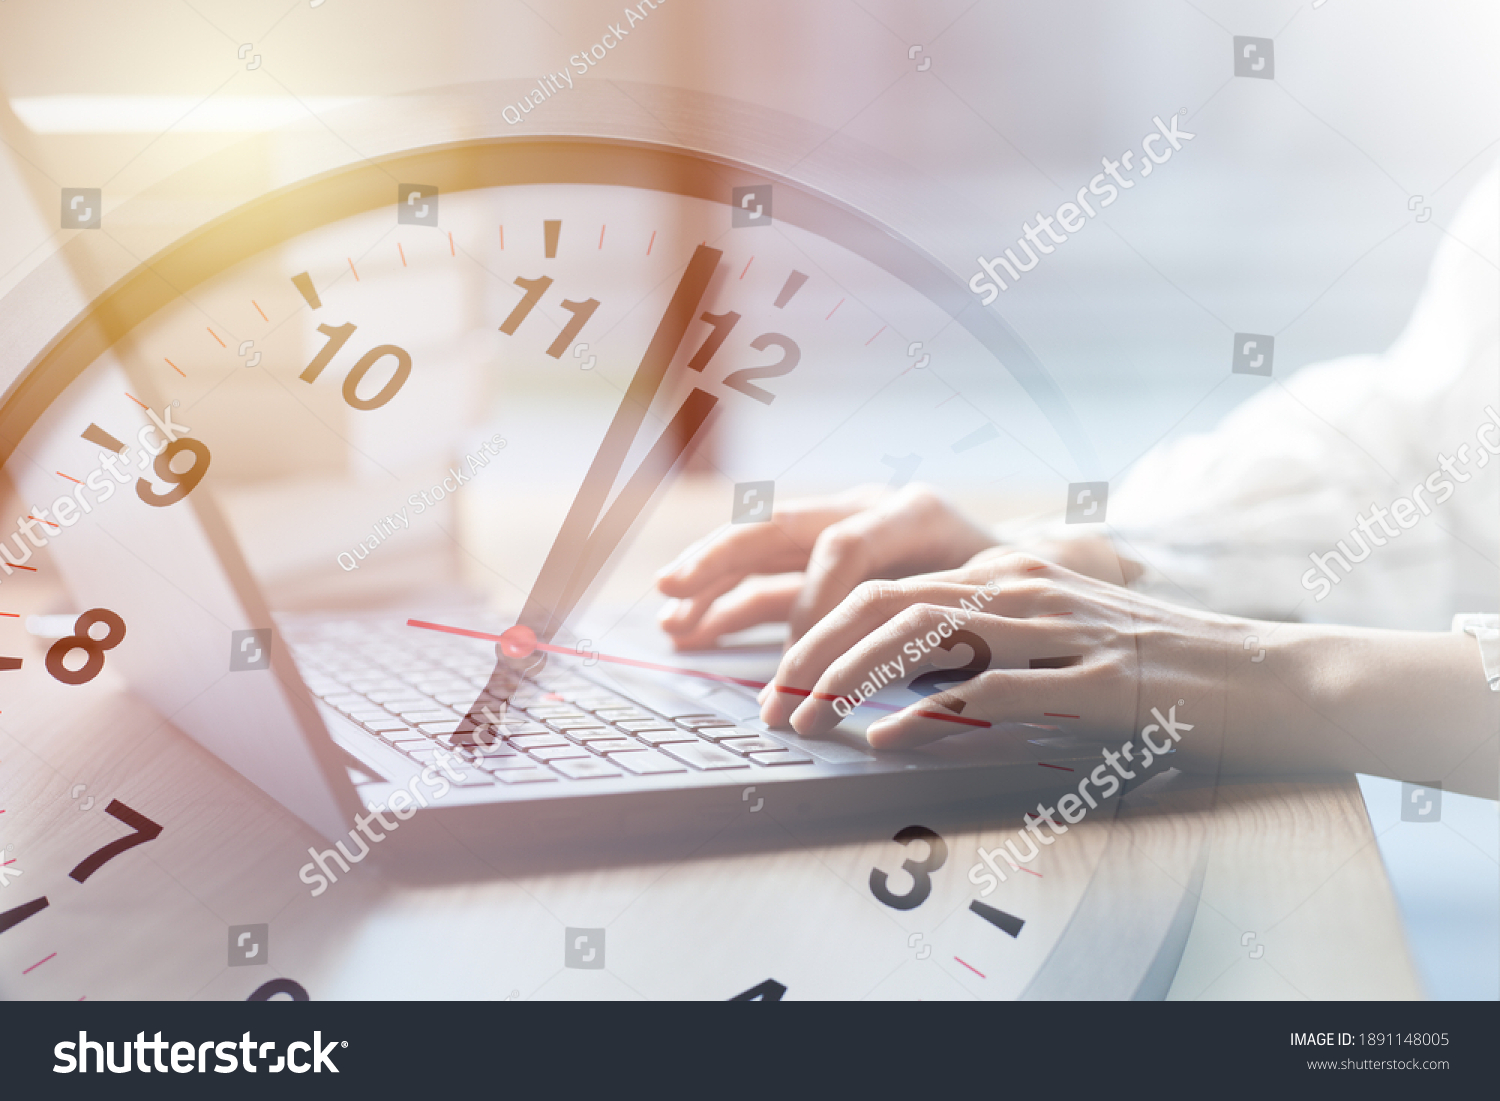 Business working times concept people work typing on laptop computer overlay with in time clock to lunch break #1891148005